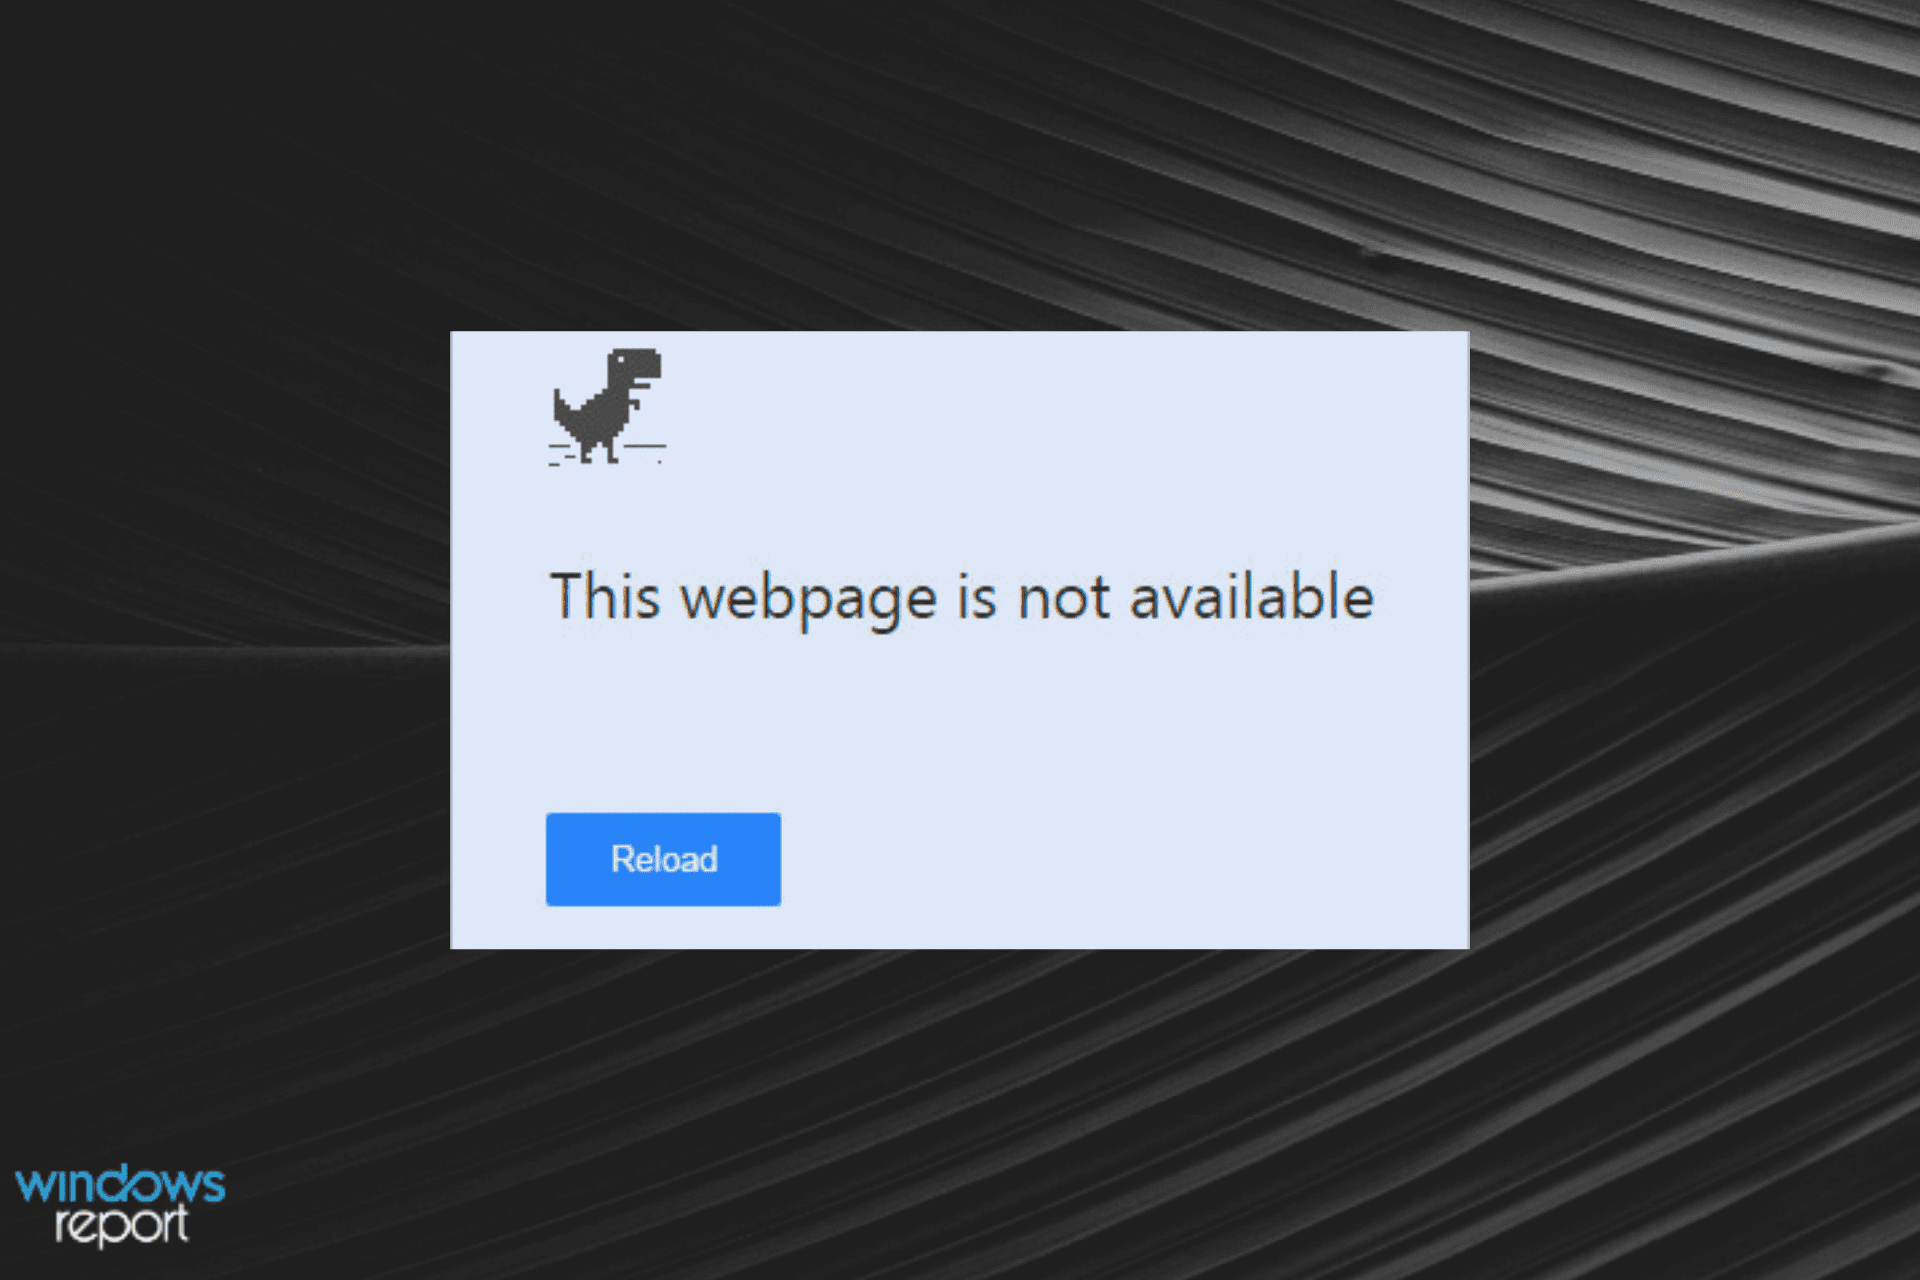 Why is a website not available but I have internet?